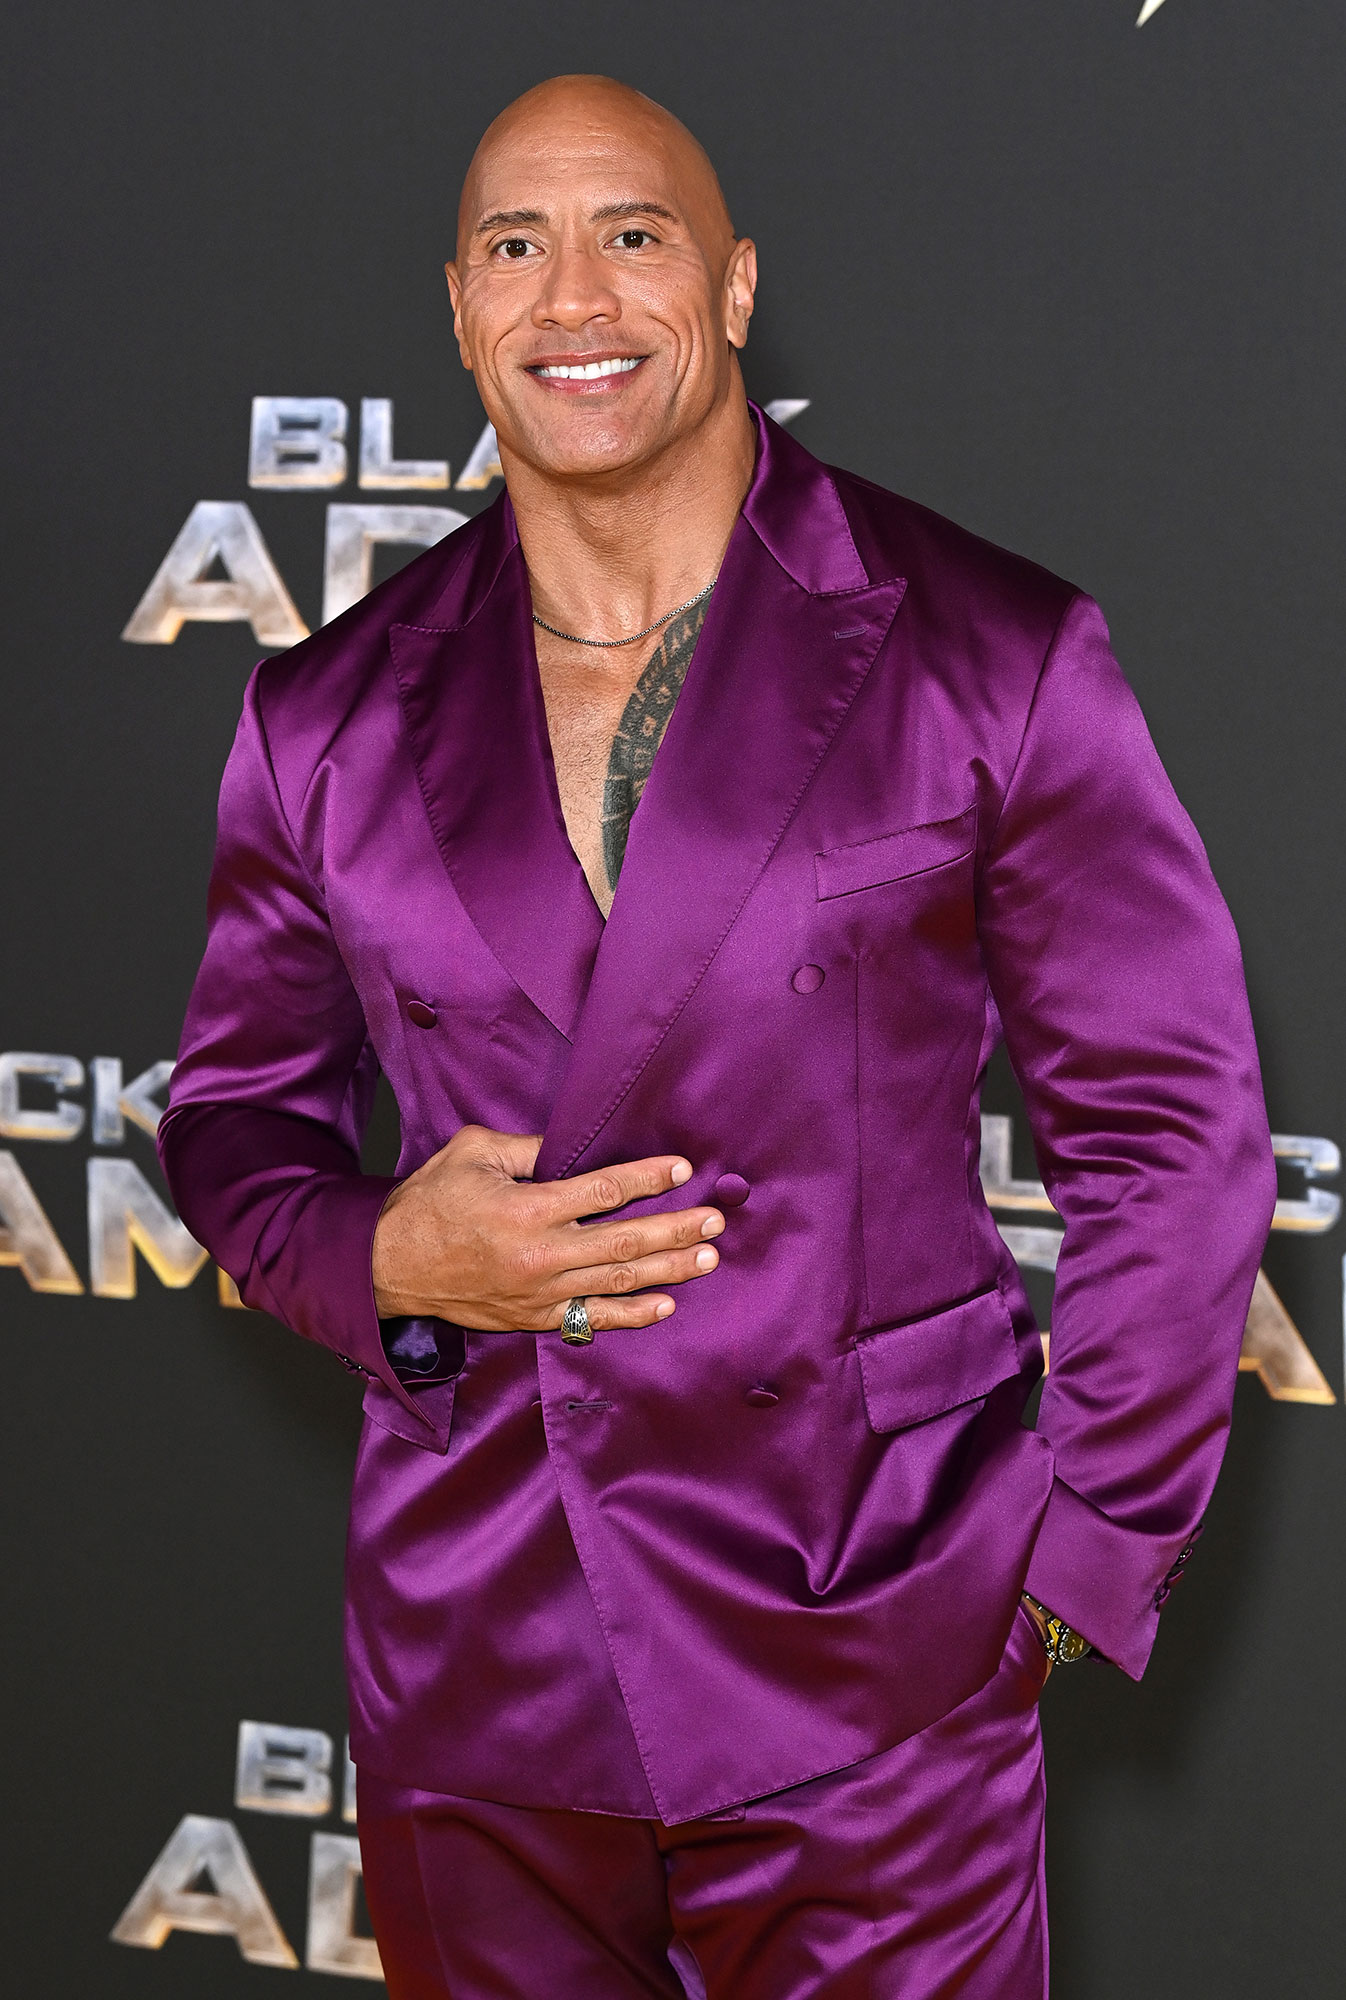 I'm excited for our players': Dwayne 'The Rock' Johnson says he